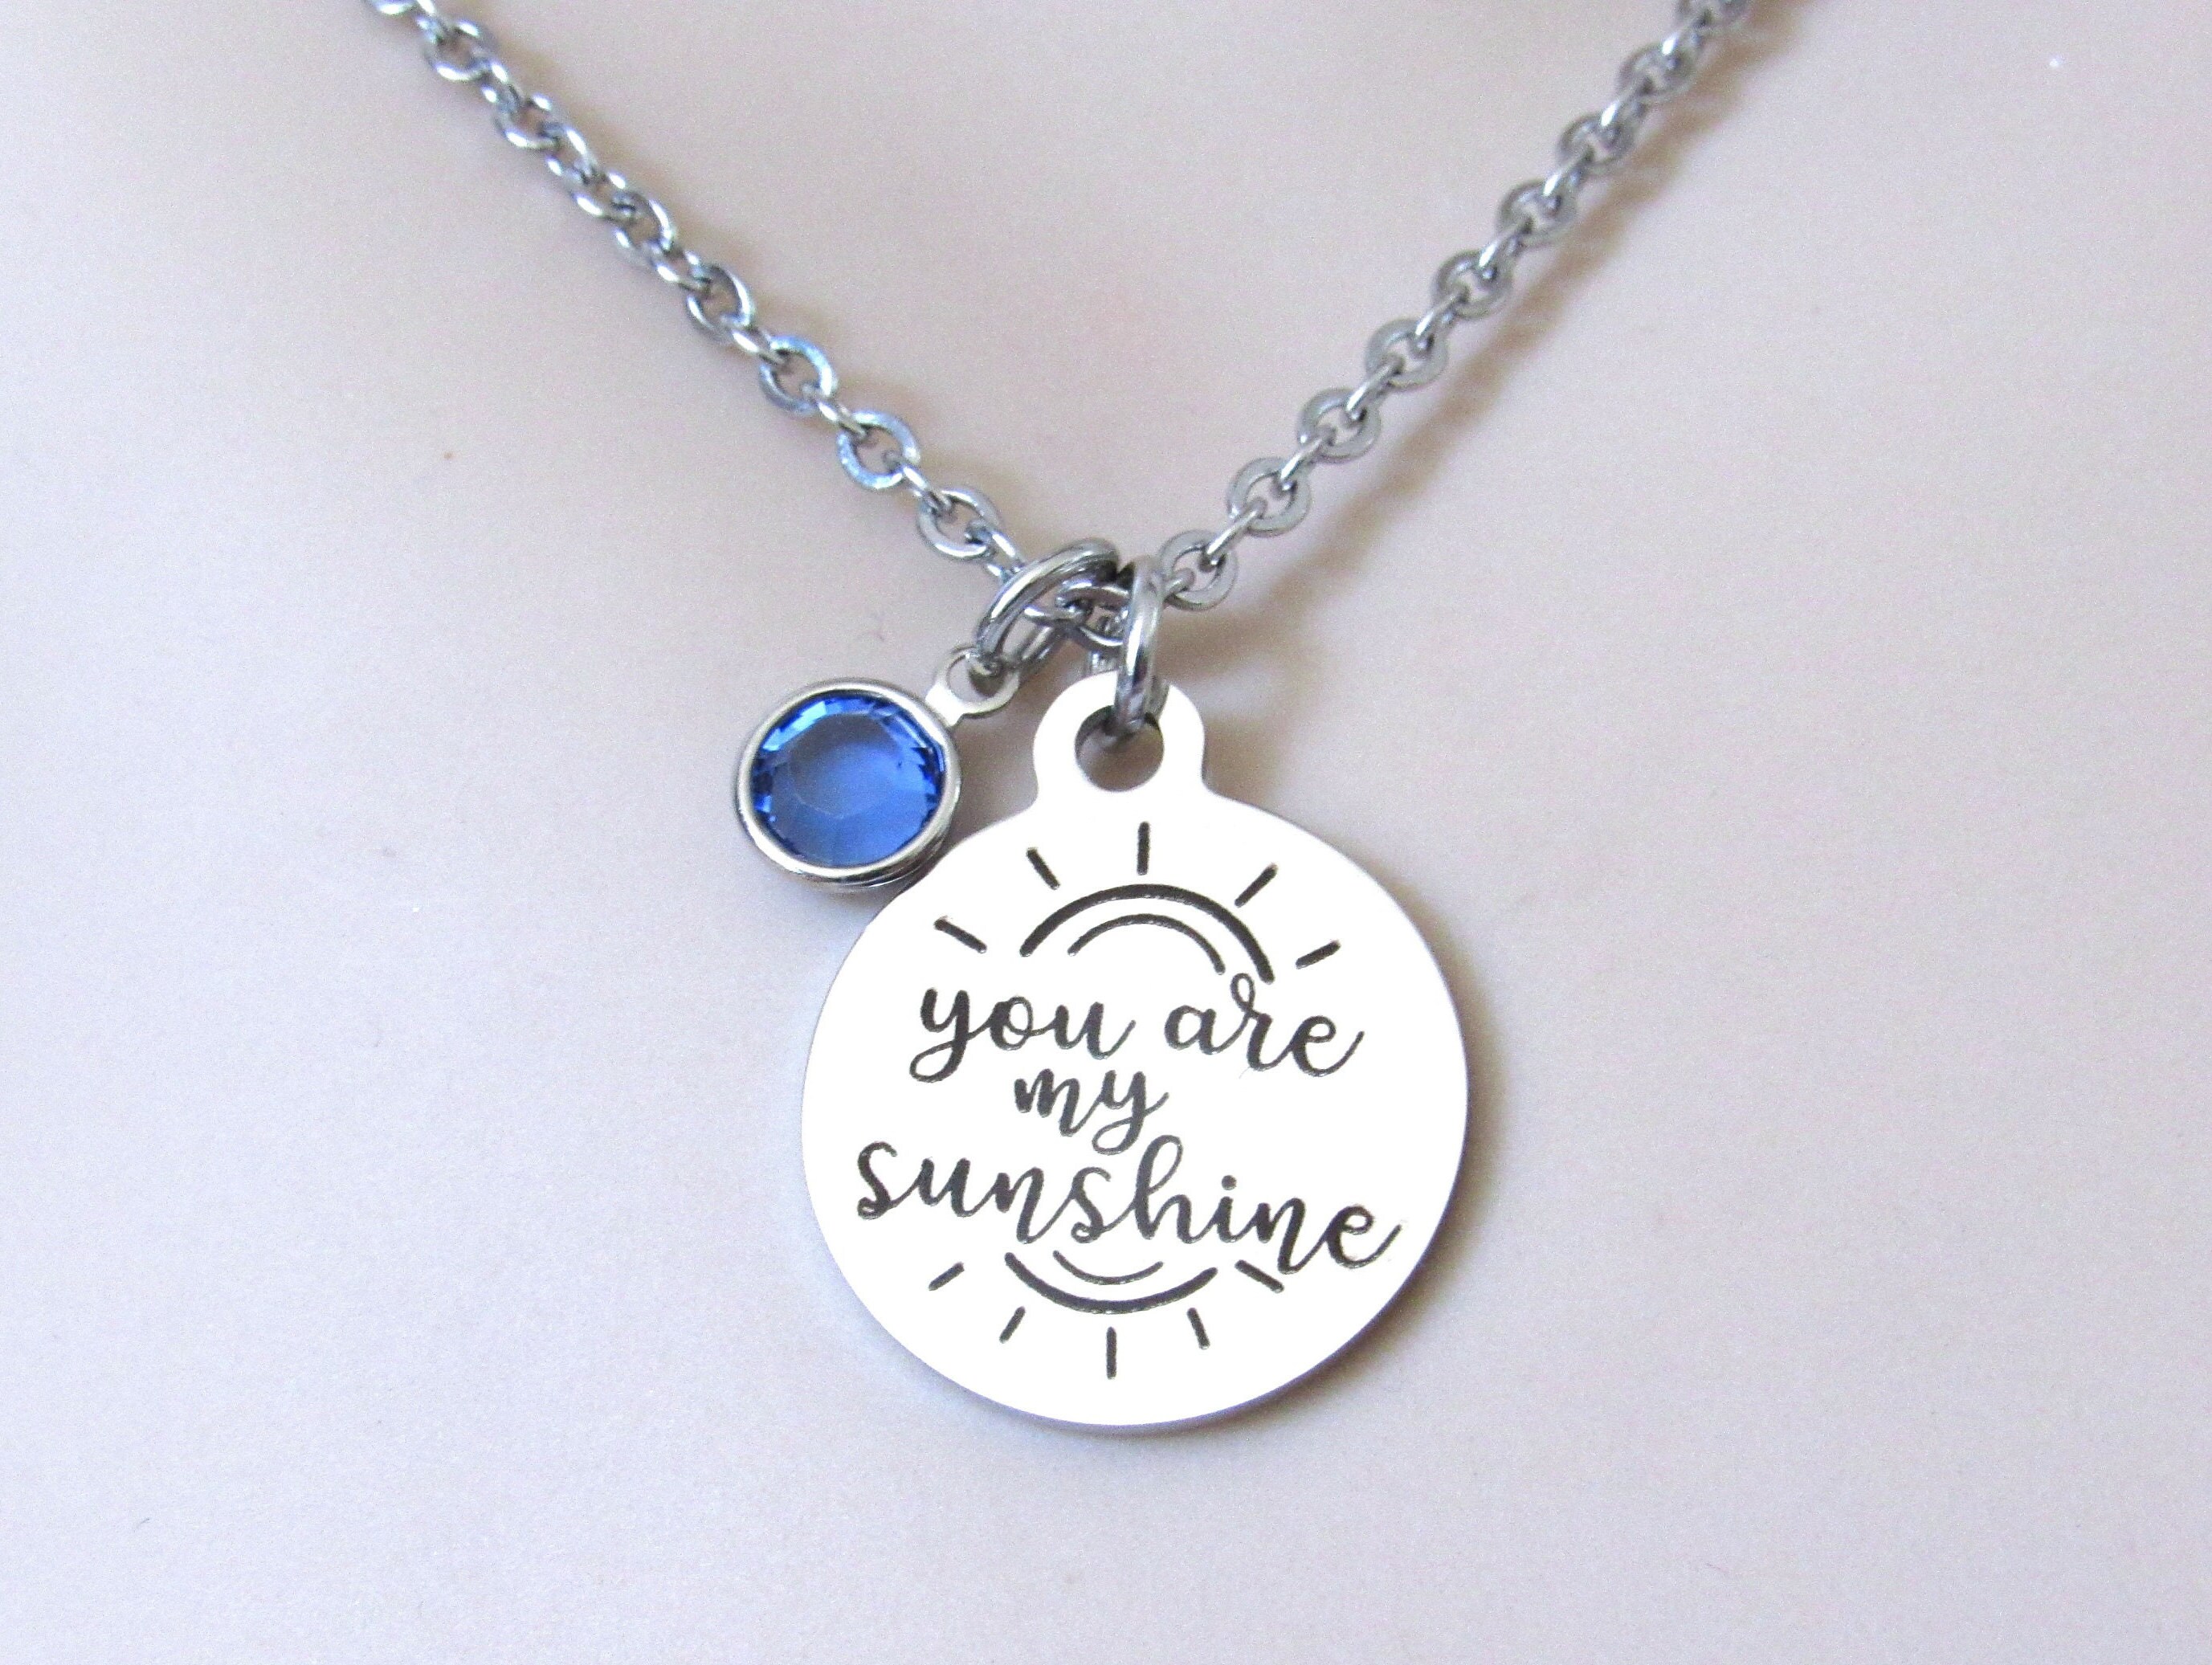 Artificial Sunflower Gifts for Women, Valentine's Day Gifts for Her,  Anniversary, Mother's Day Gift for Mum, You are My Sunshine Necklace, Gifts  for Mum, Wife, Girlfriend, Sisters, Aunt, normal : Amazon.co.uk: Home